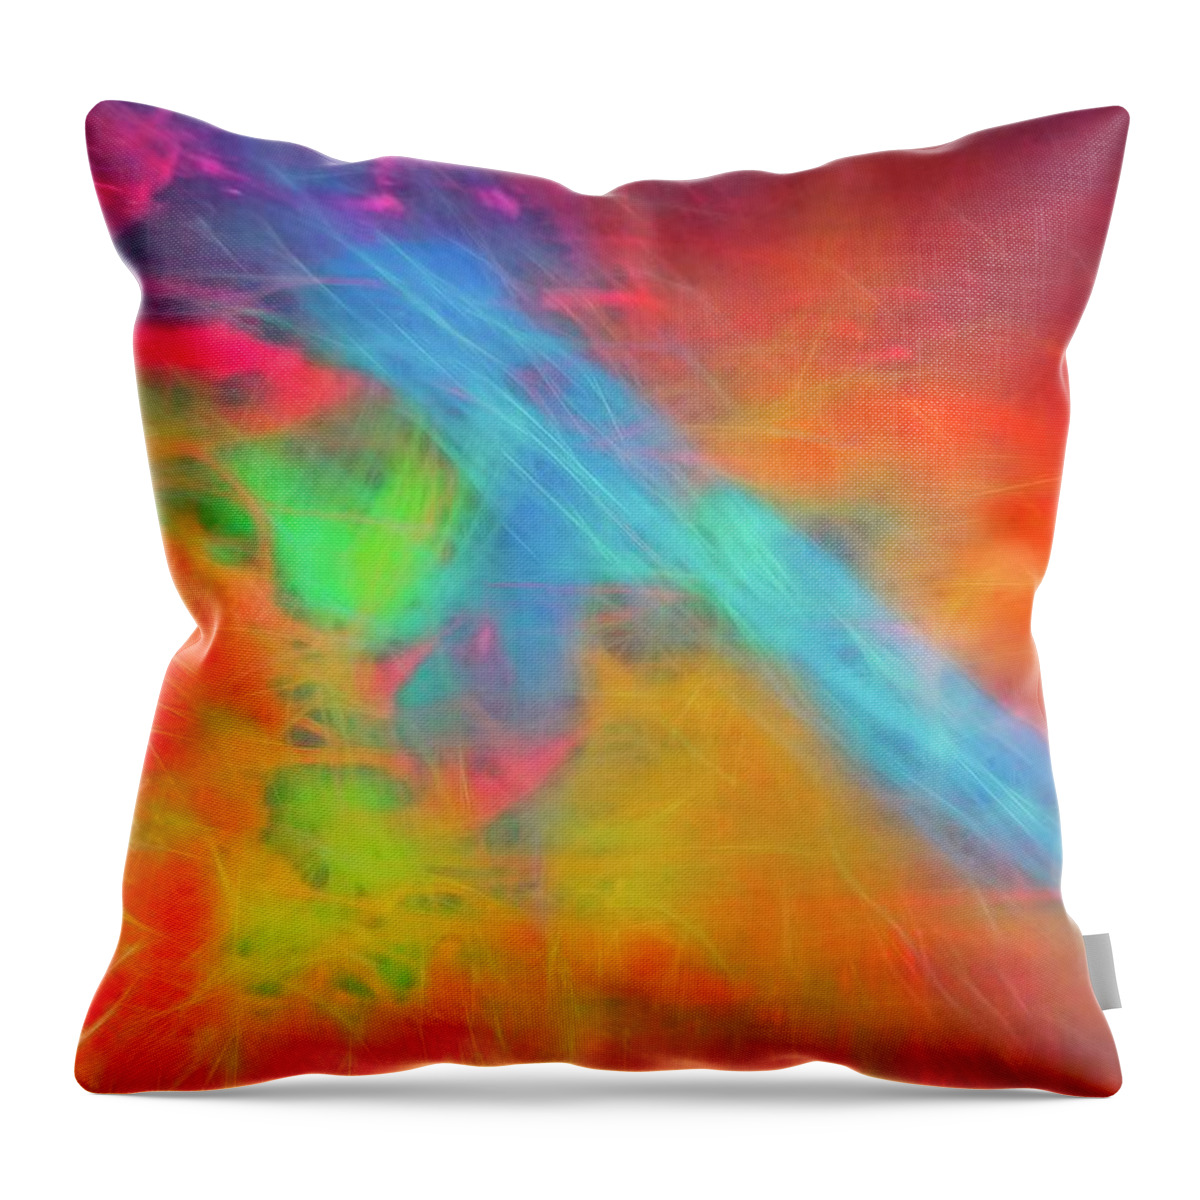 Abstract Throw Pillow featuring the digital art Abstract 51 by Steve DaPonte